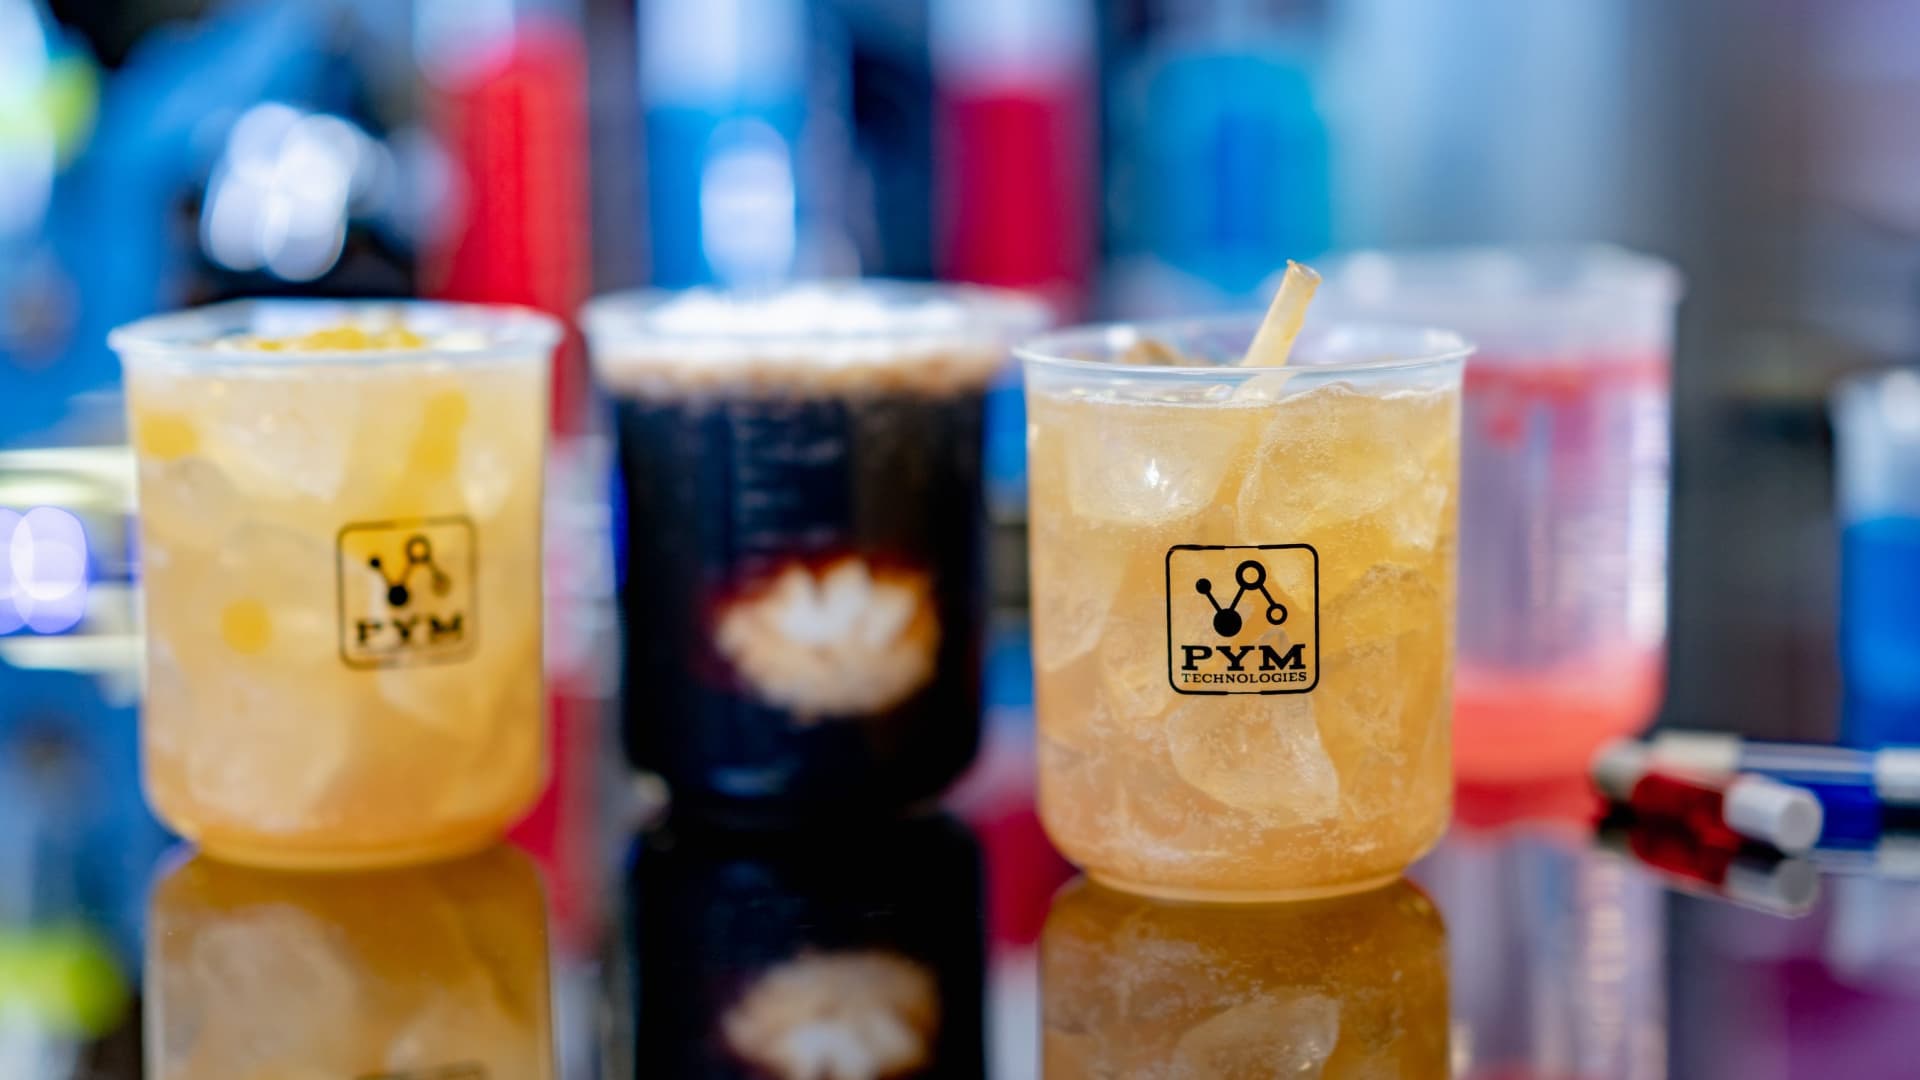 Pym Tasting Lab, adjacent to the Pym Test Kitchen in Avengers Campus at Disney California Adventure Park, features alcoholic drinks for adults, including: X-Periment, Molecular Meltdown, Honey Buzz and Particle Fizz.